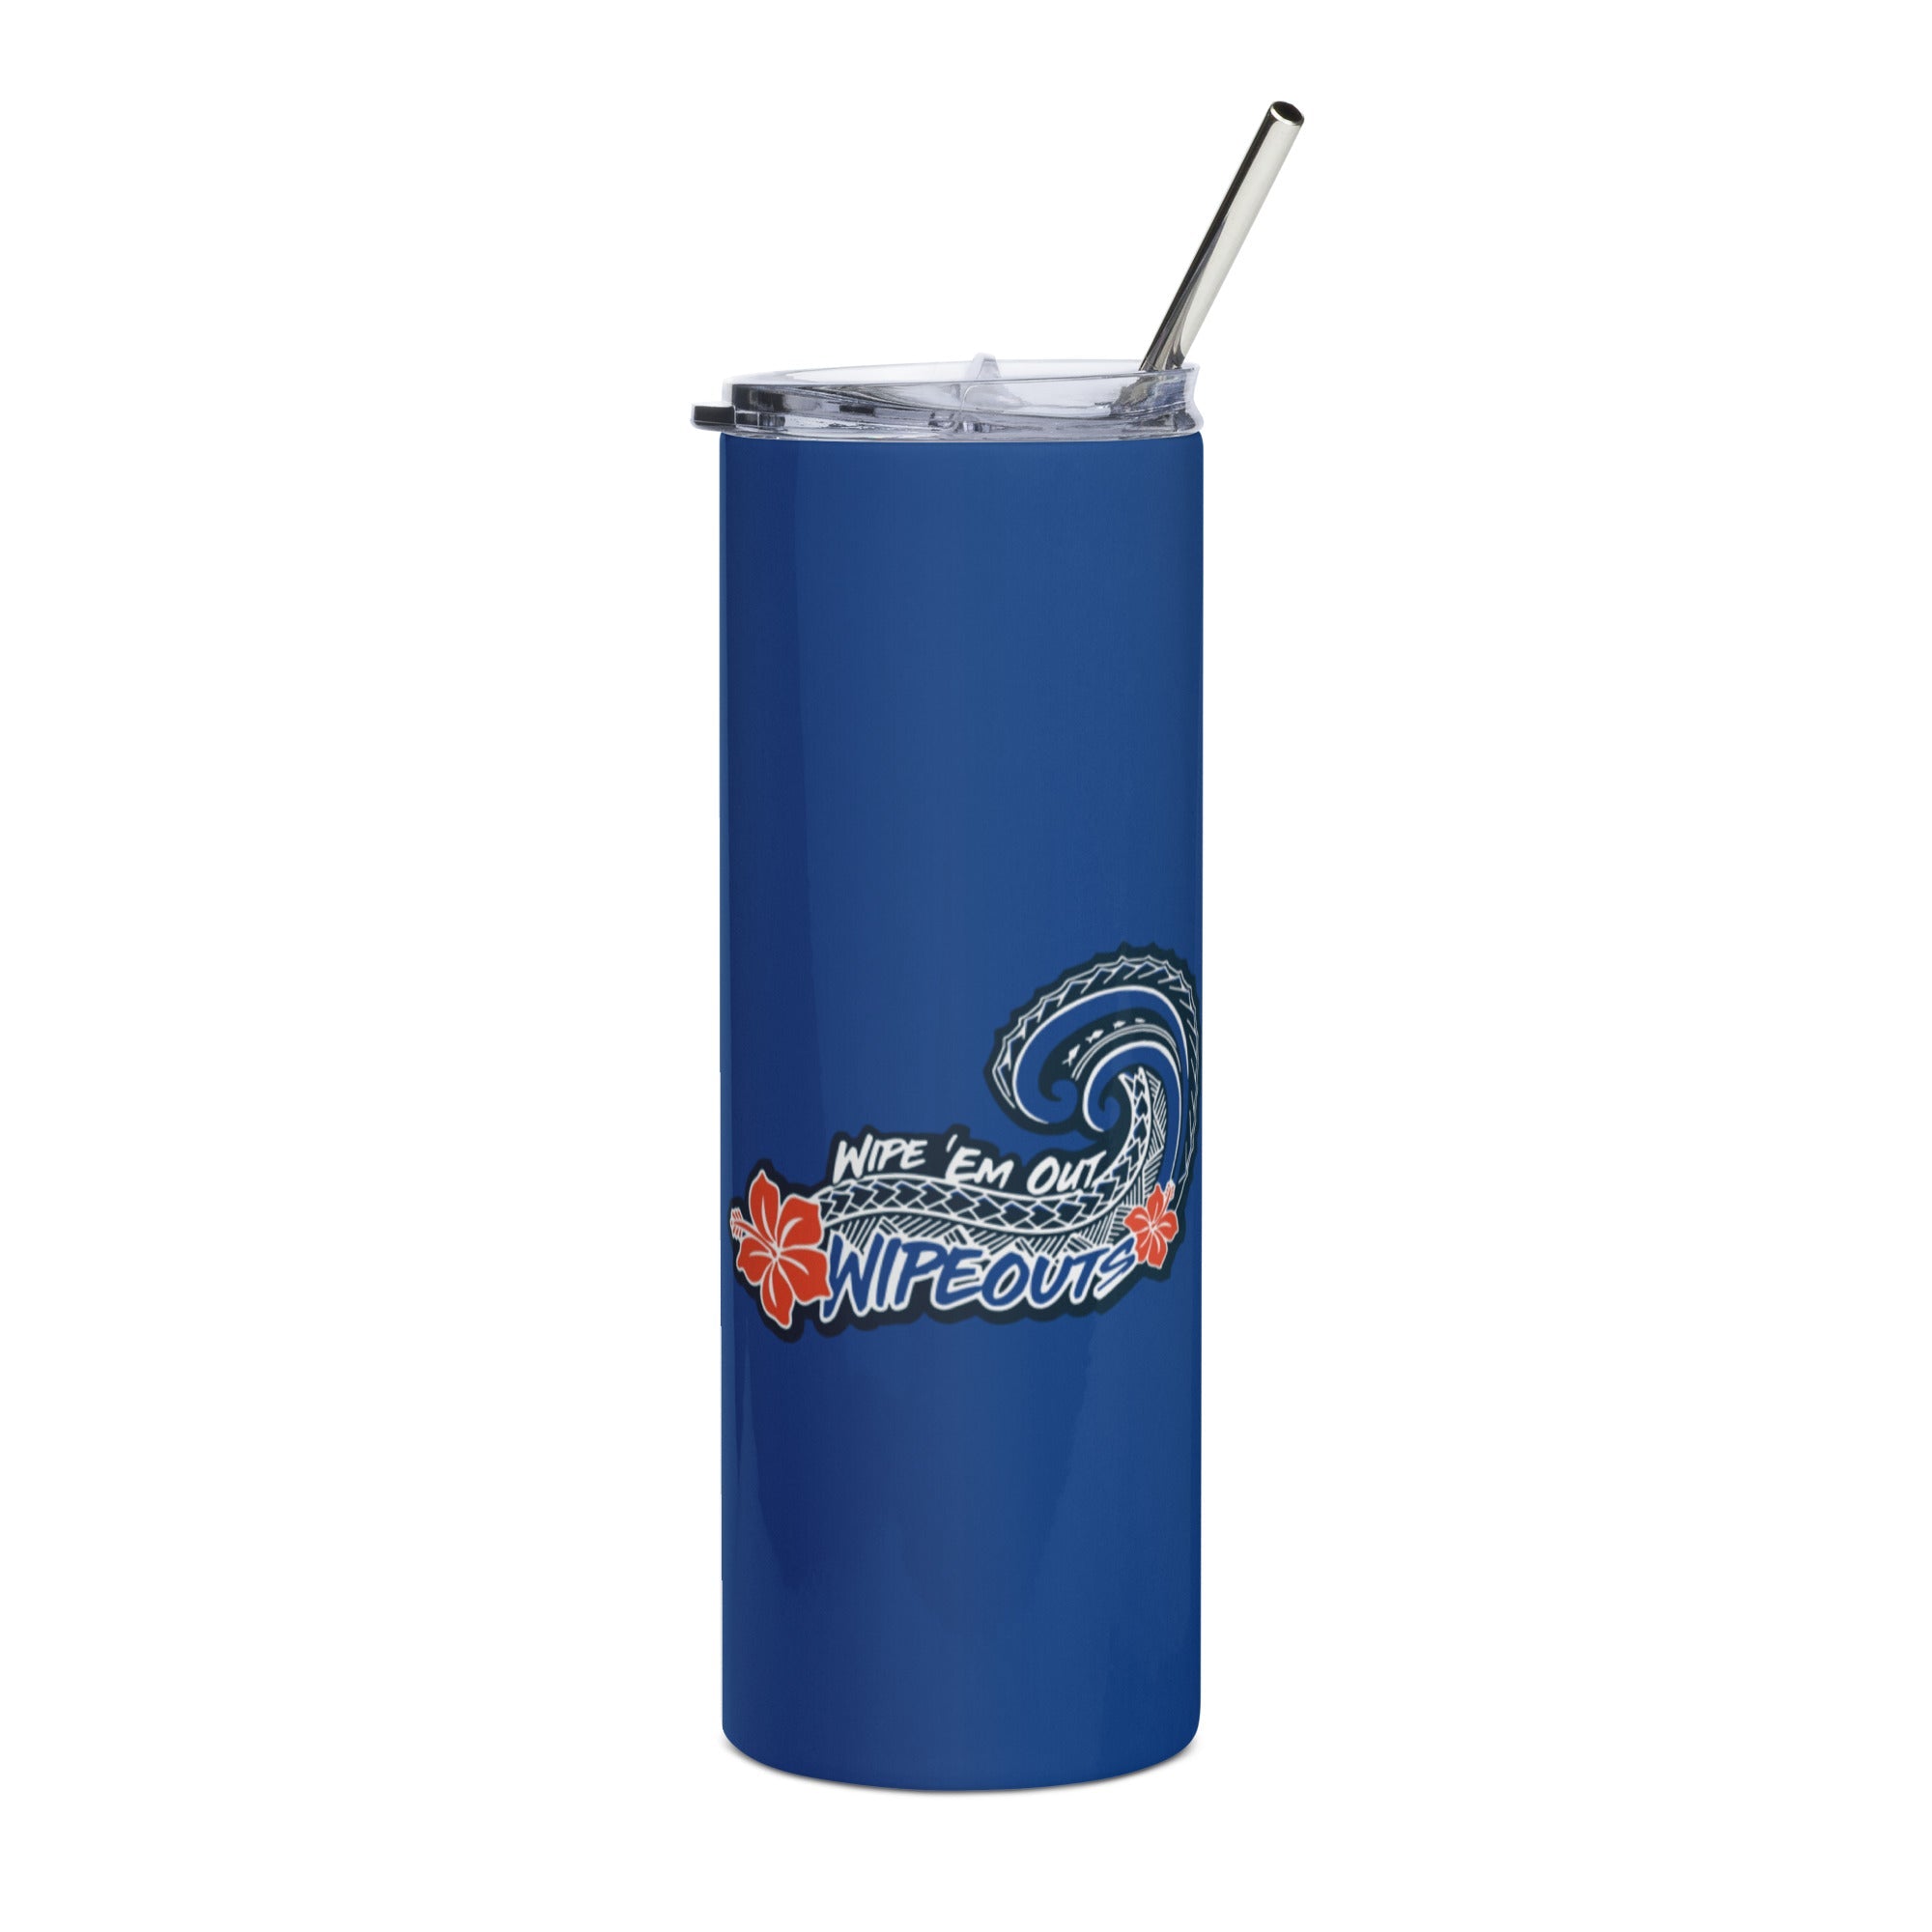 IEW Stainless steel tumbler